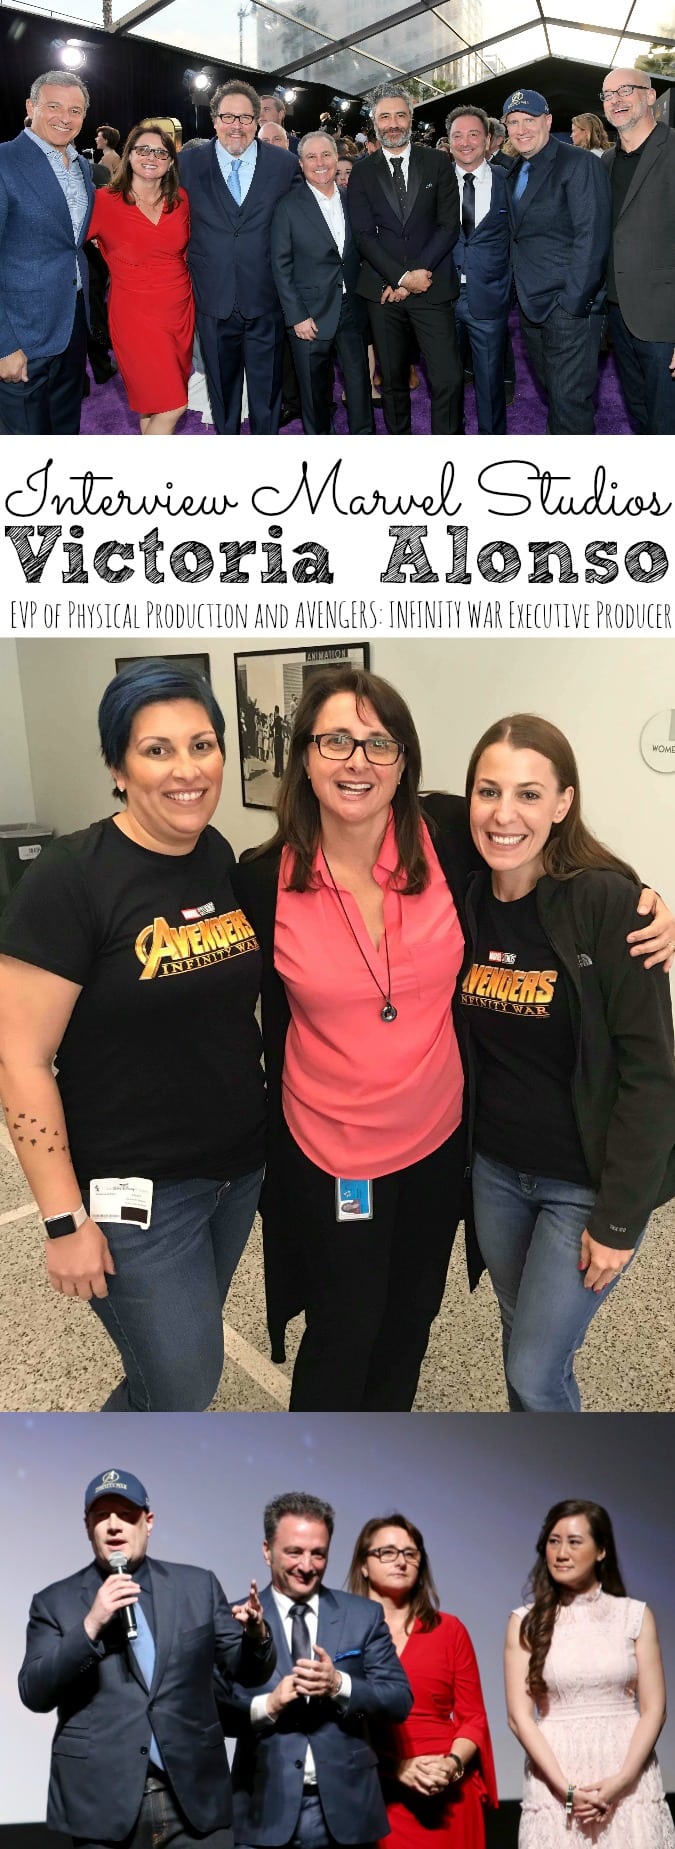 Interview Marvel Studios Victoria Alonso | EVP of Physical Production and AVENGERS: INFINITY WAR Executive Producer #InfinityWarEvent - simplytodaylife.com